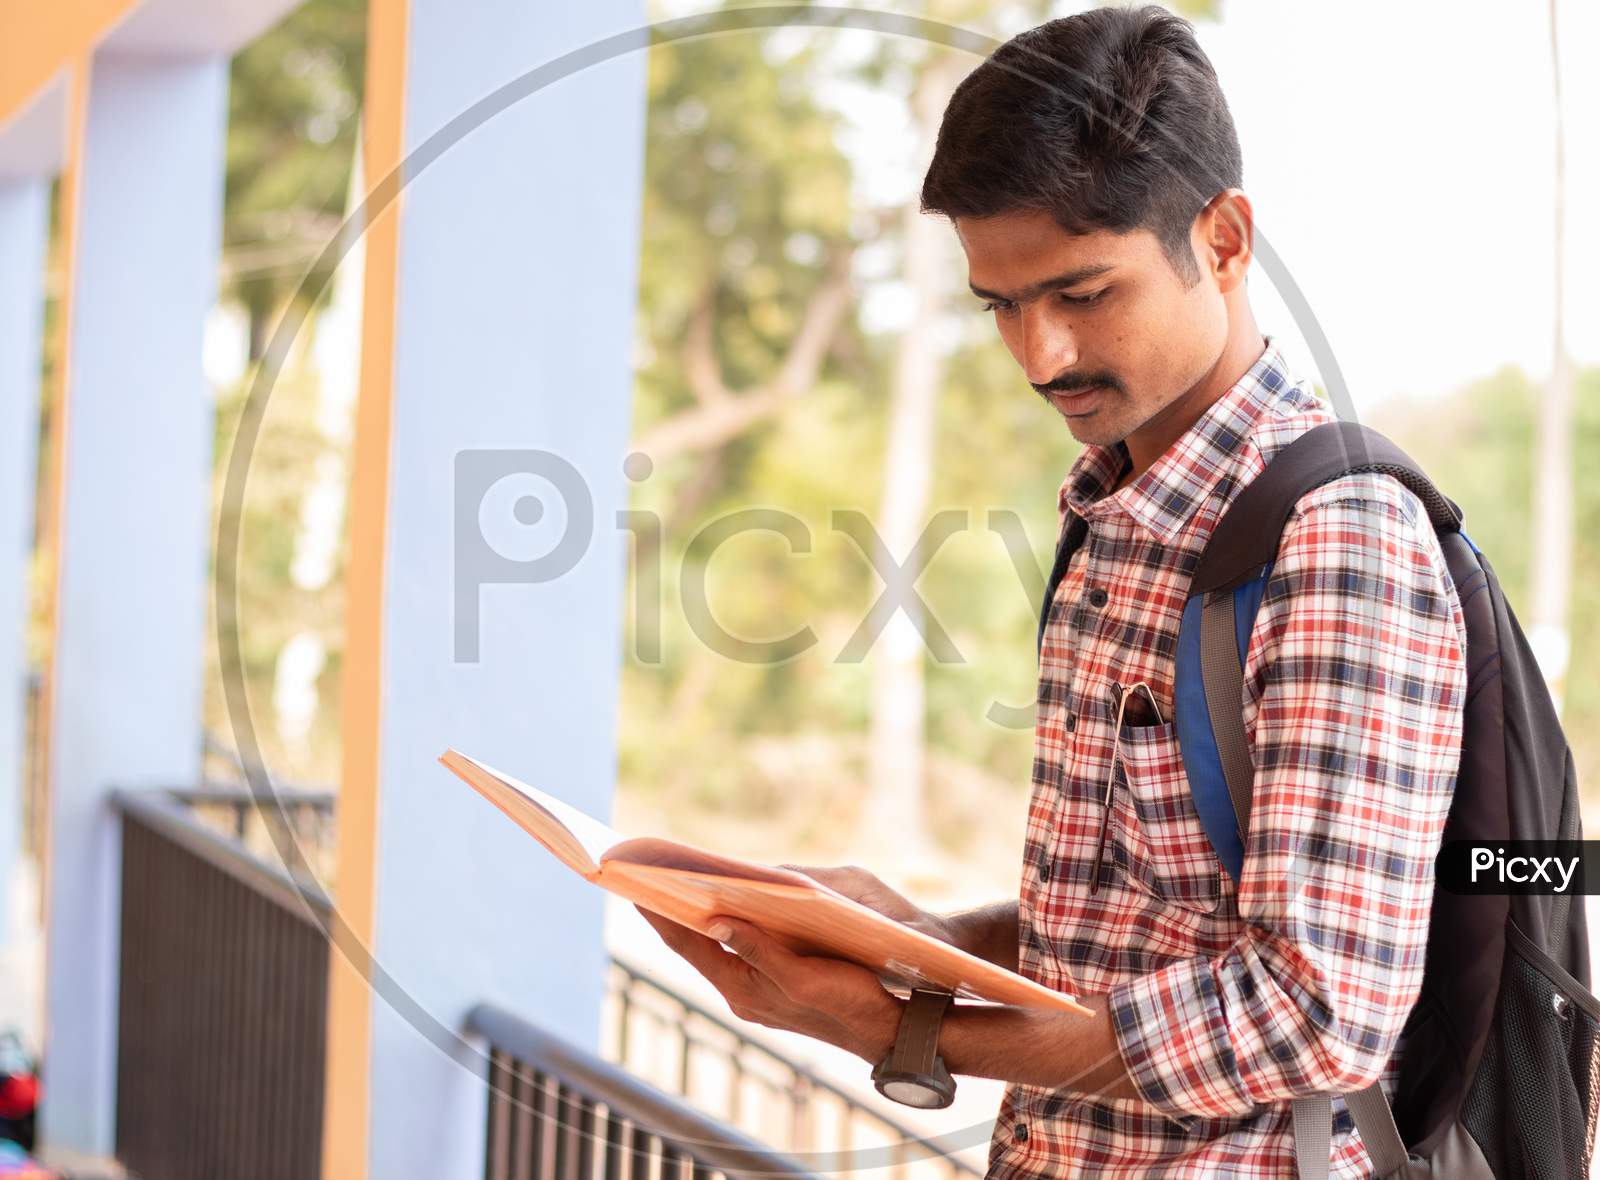 A Student studying by Looking Into Books At College - Education, Learning Student, People Concept